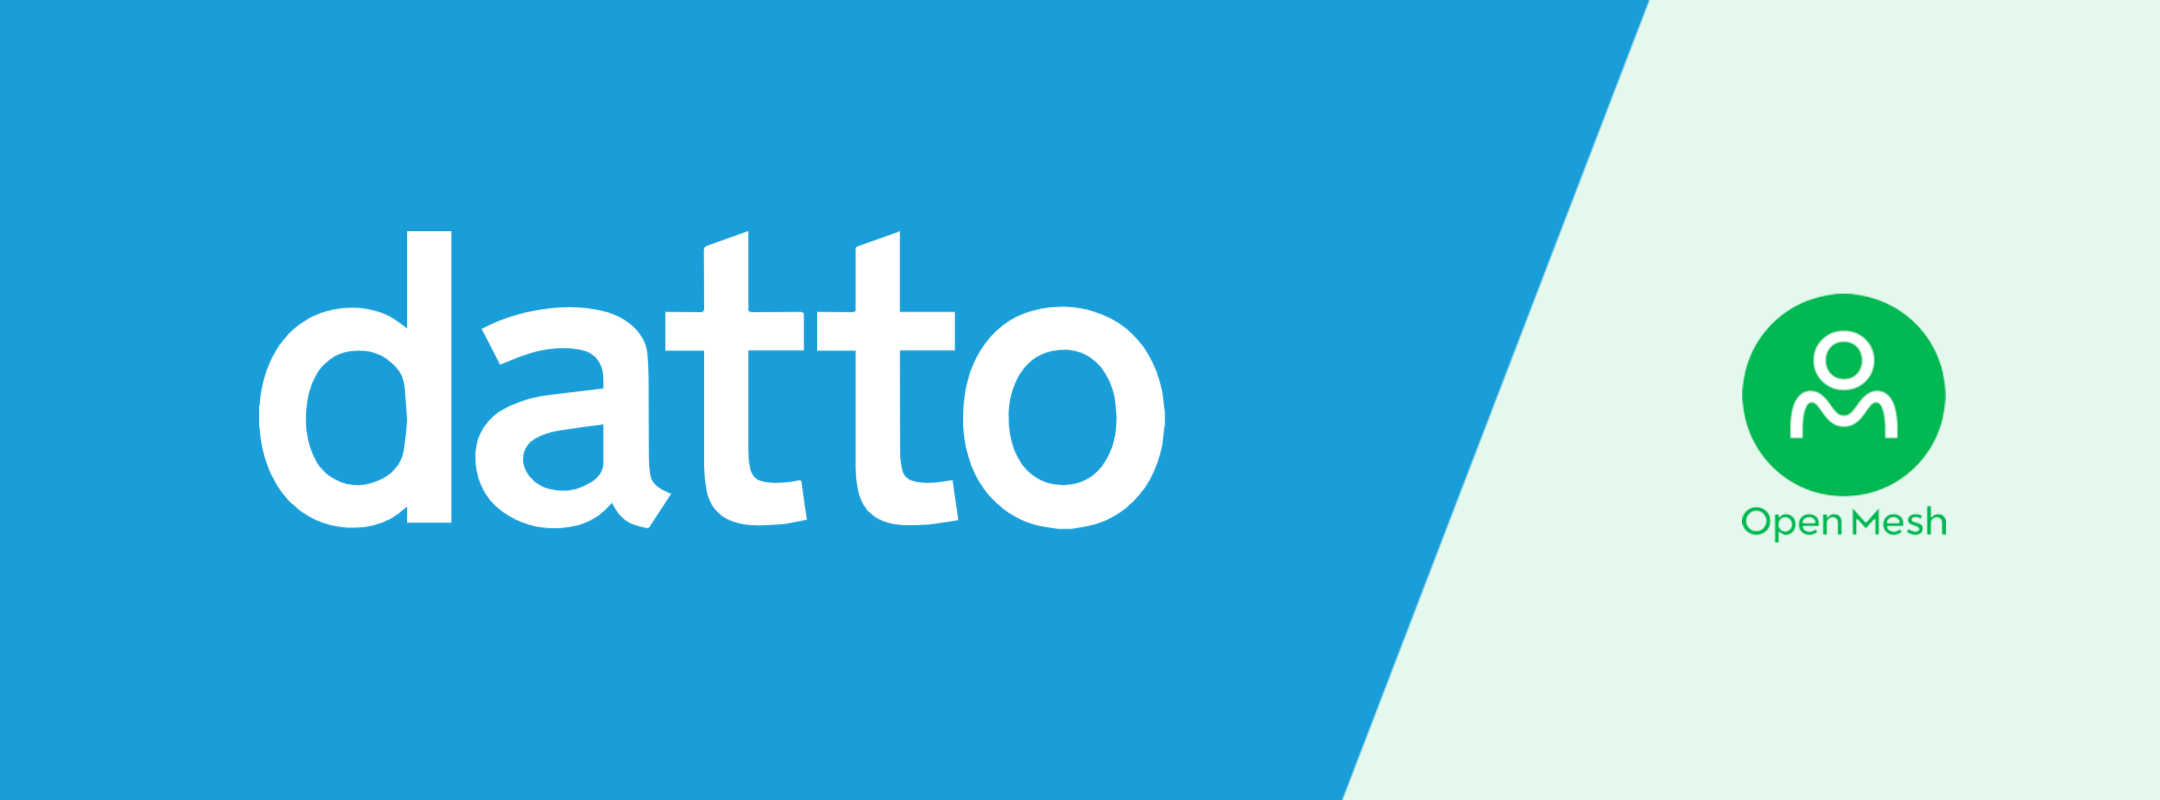 Open Mesh acquired by Datto